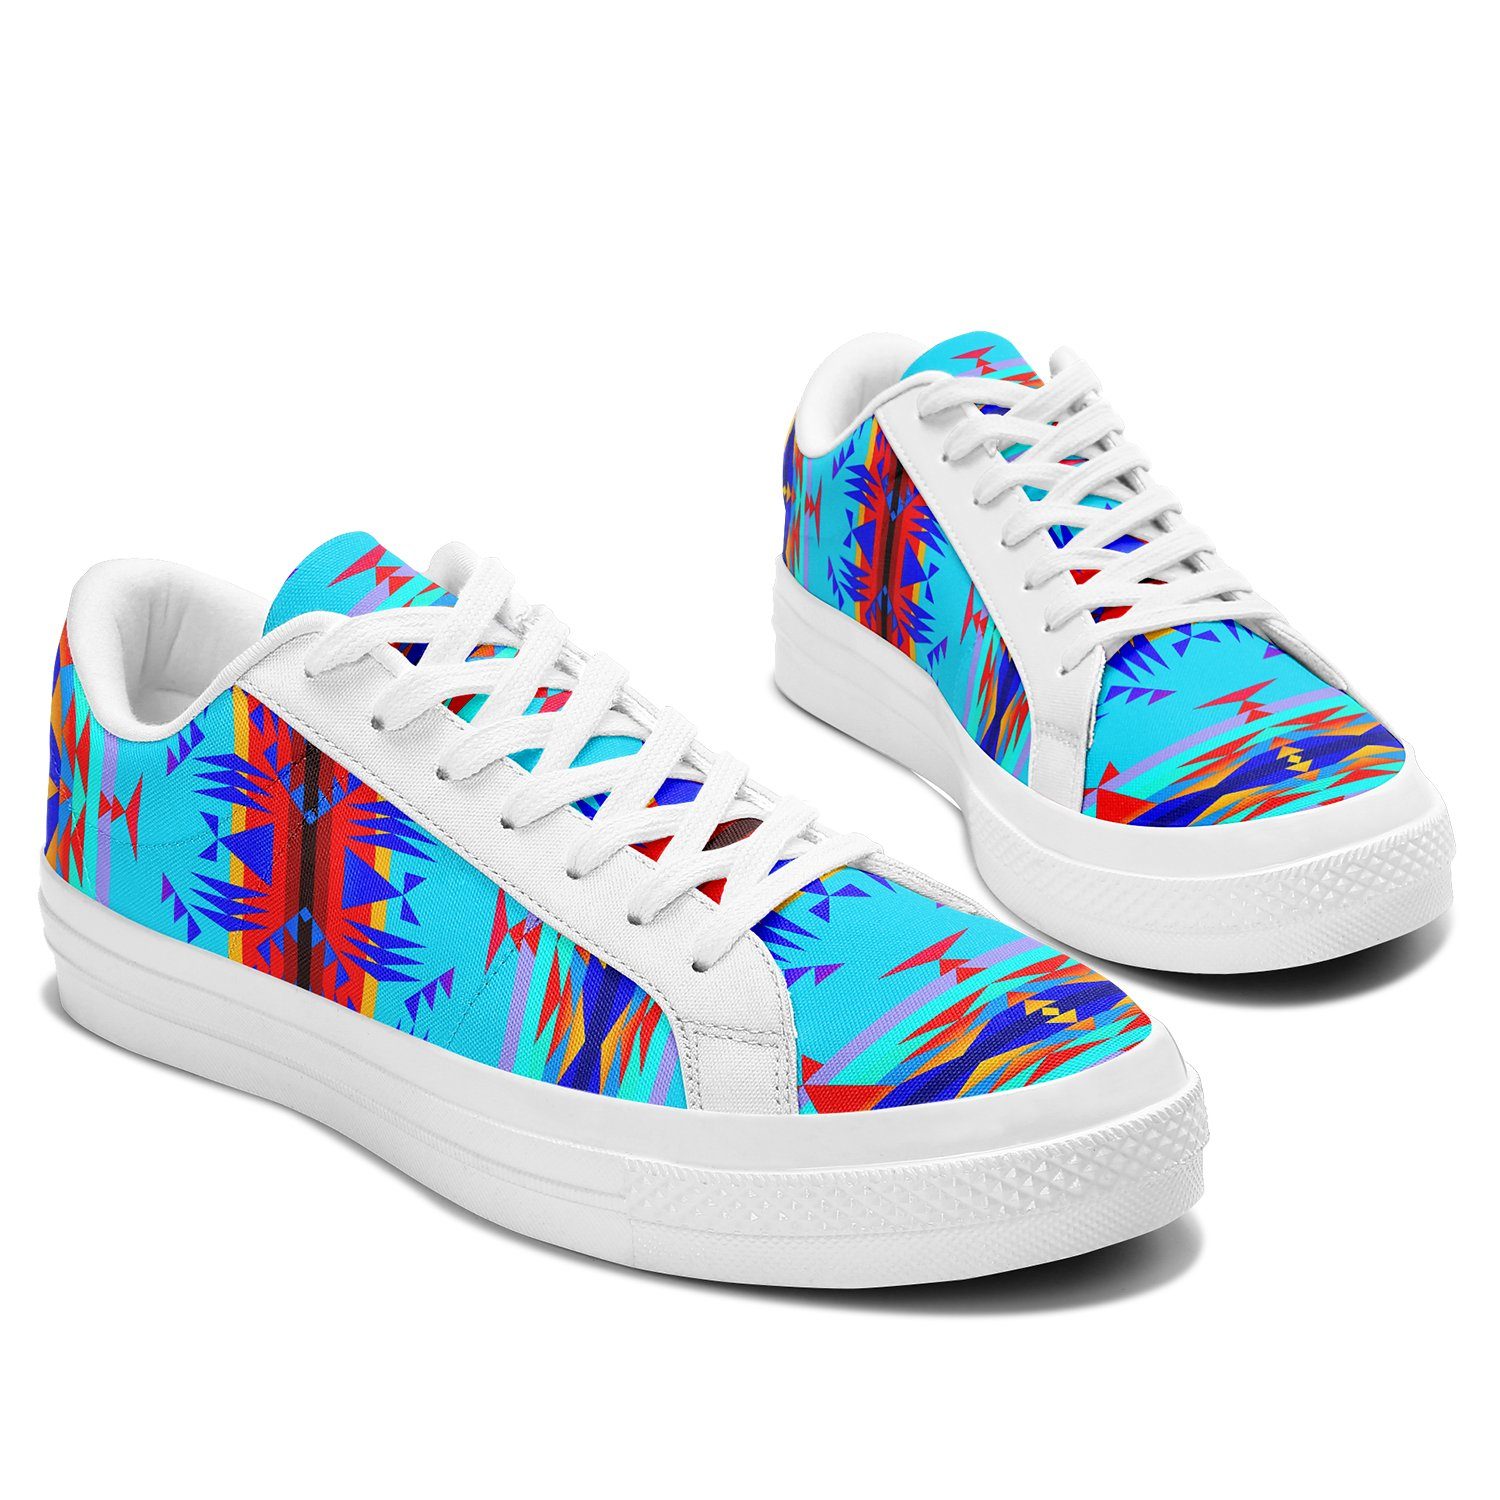 Between the Mountains Blue Aapisi Low Top Canvas Shoes White Sole 49 Dzine 